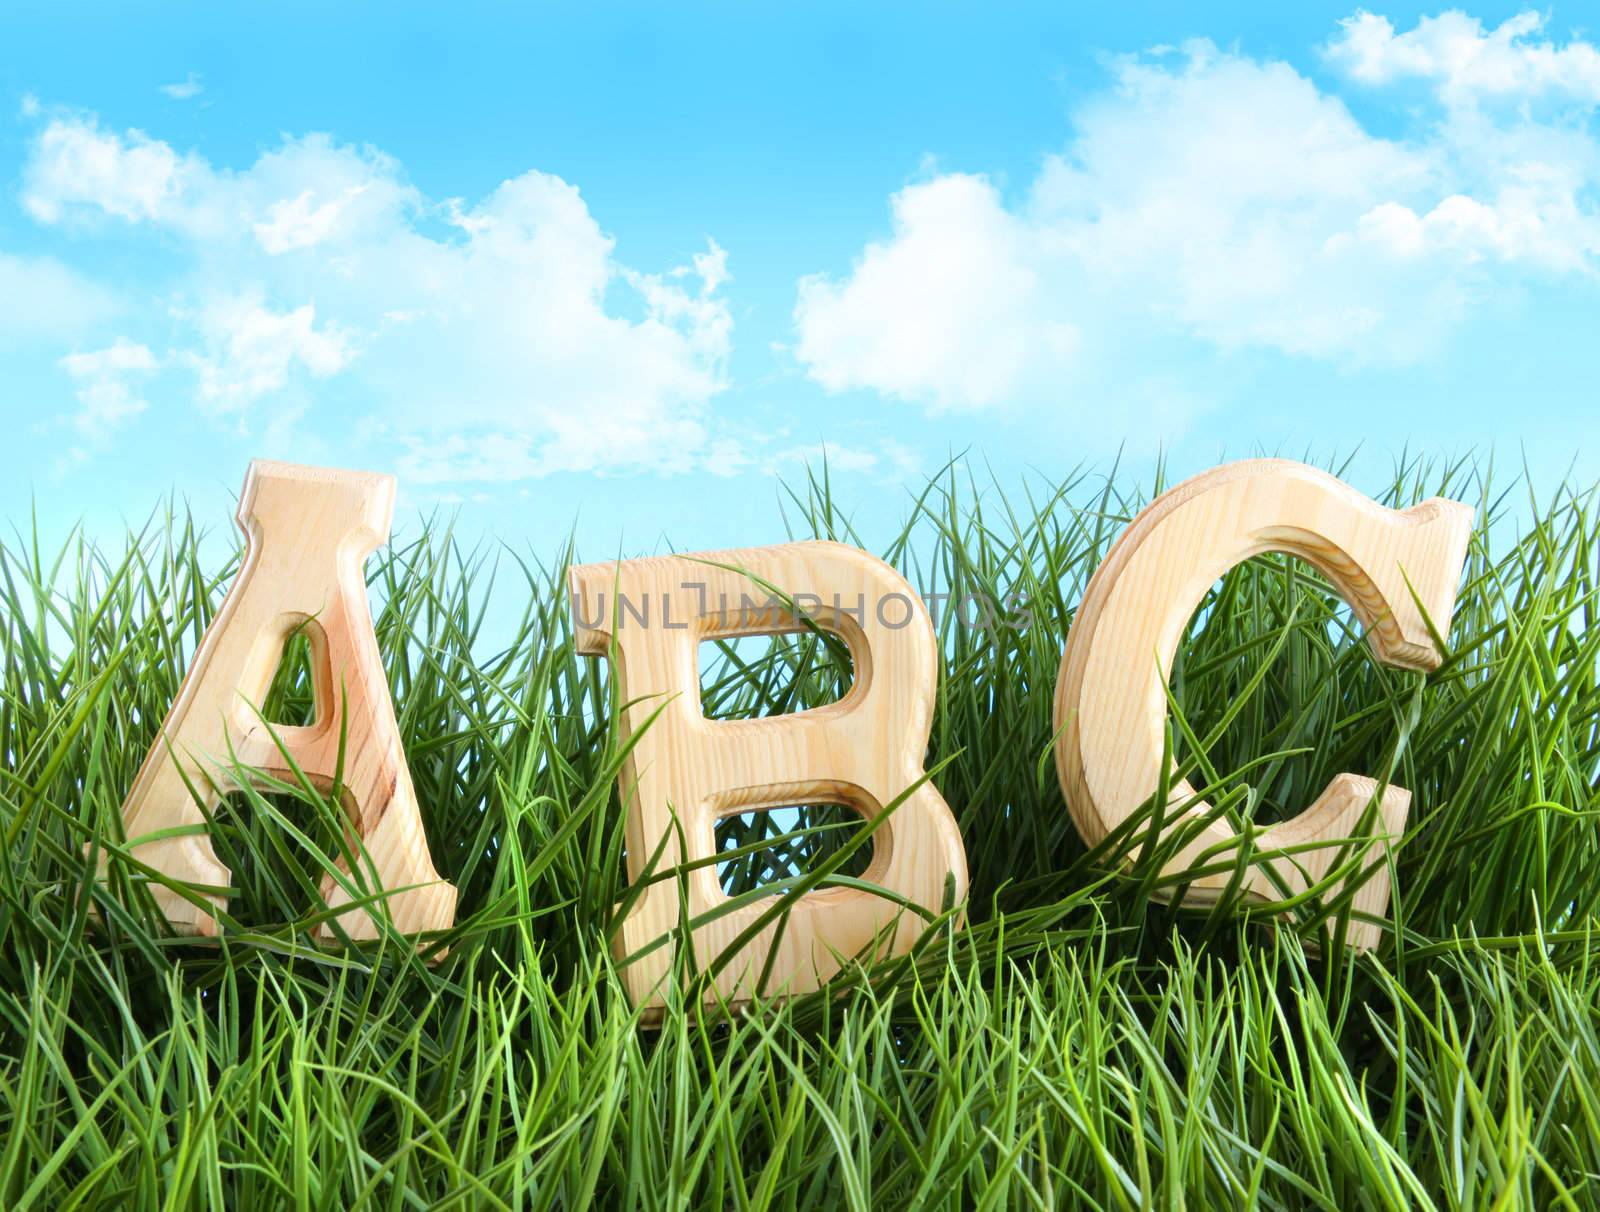 ABC letters in the grass by Sandralise